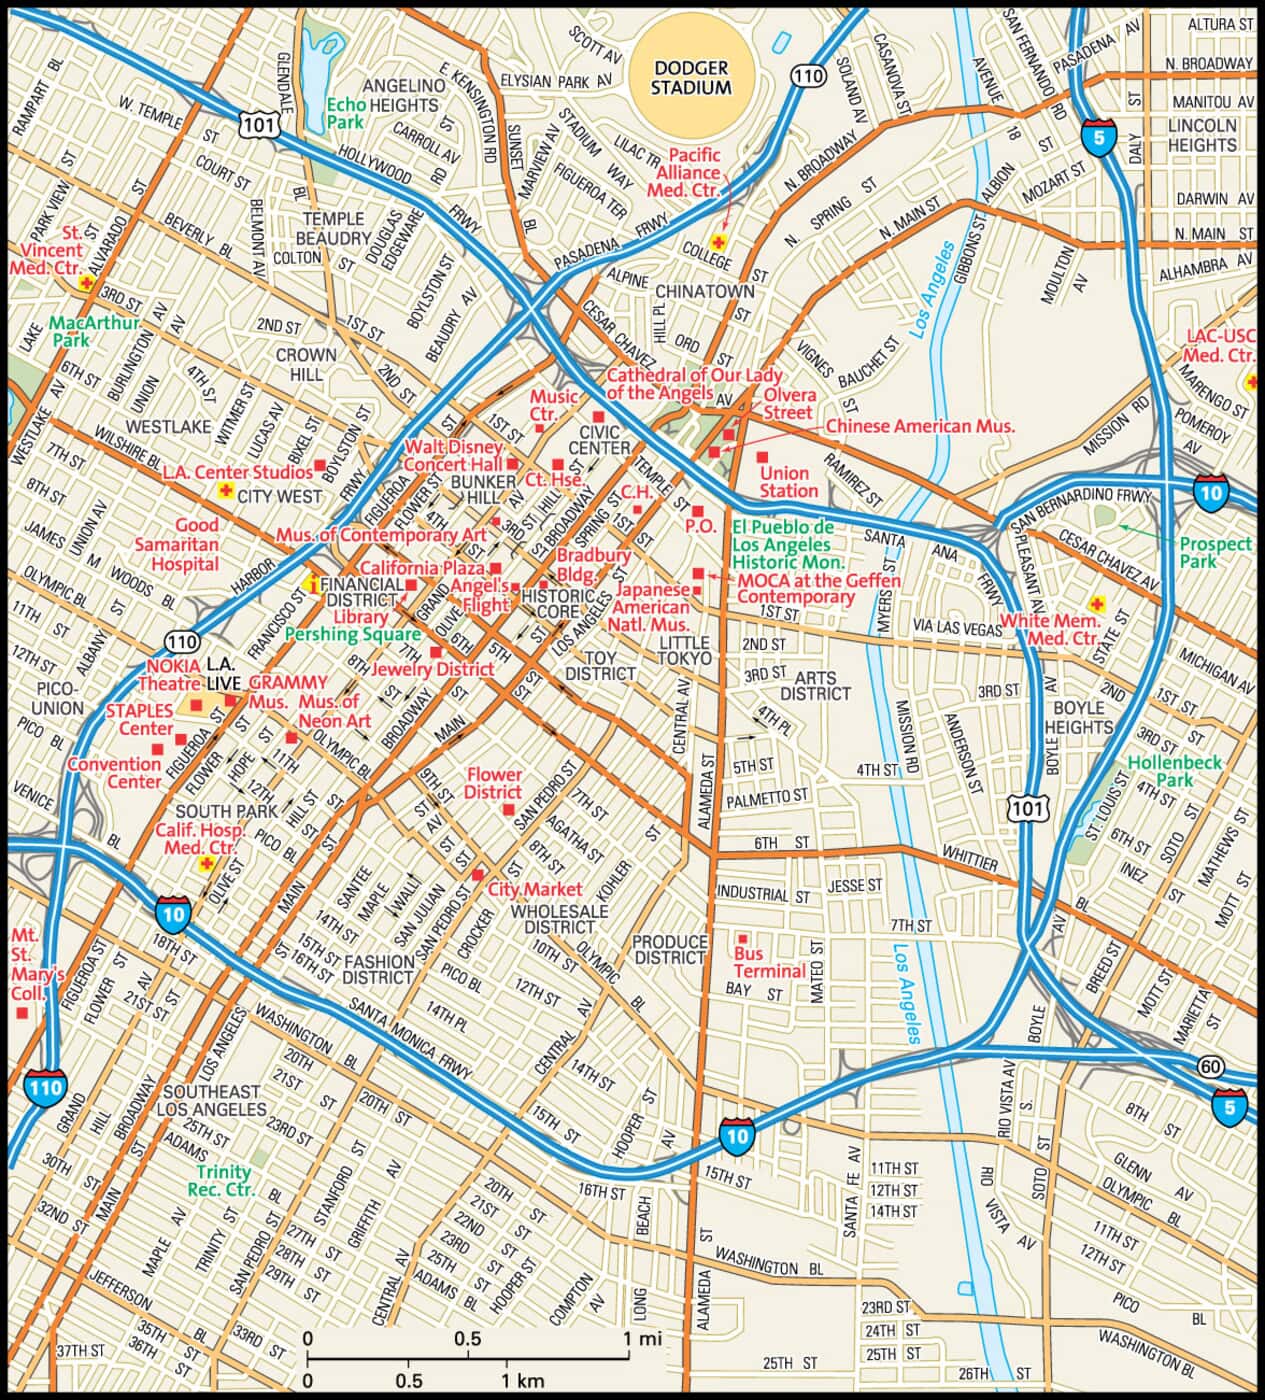 Los Angeles Downtown Map Los Angeles Map   Guide to Los Angeles, California